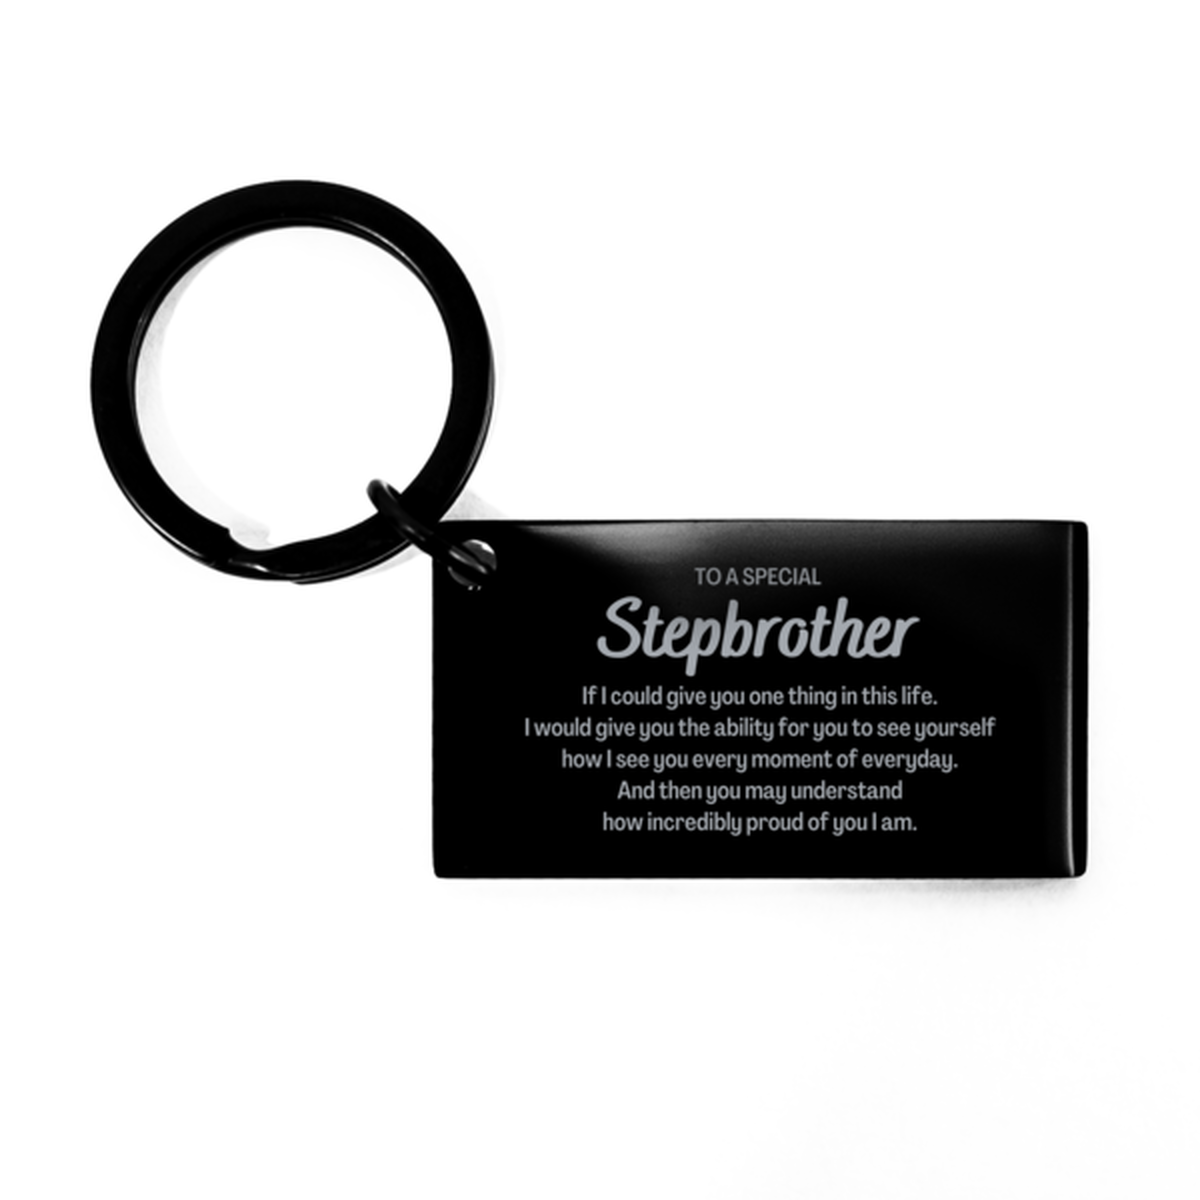 To My Stepbrother Keychain, Gifts For Stepbrother Engraved, Inspirational Gifts for Christmas Birthday, Epic Gifts for Stepbrother To A Special Stepbrother how incredibly proud of you I am